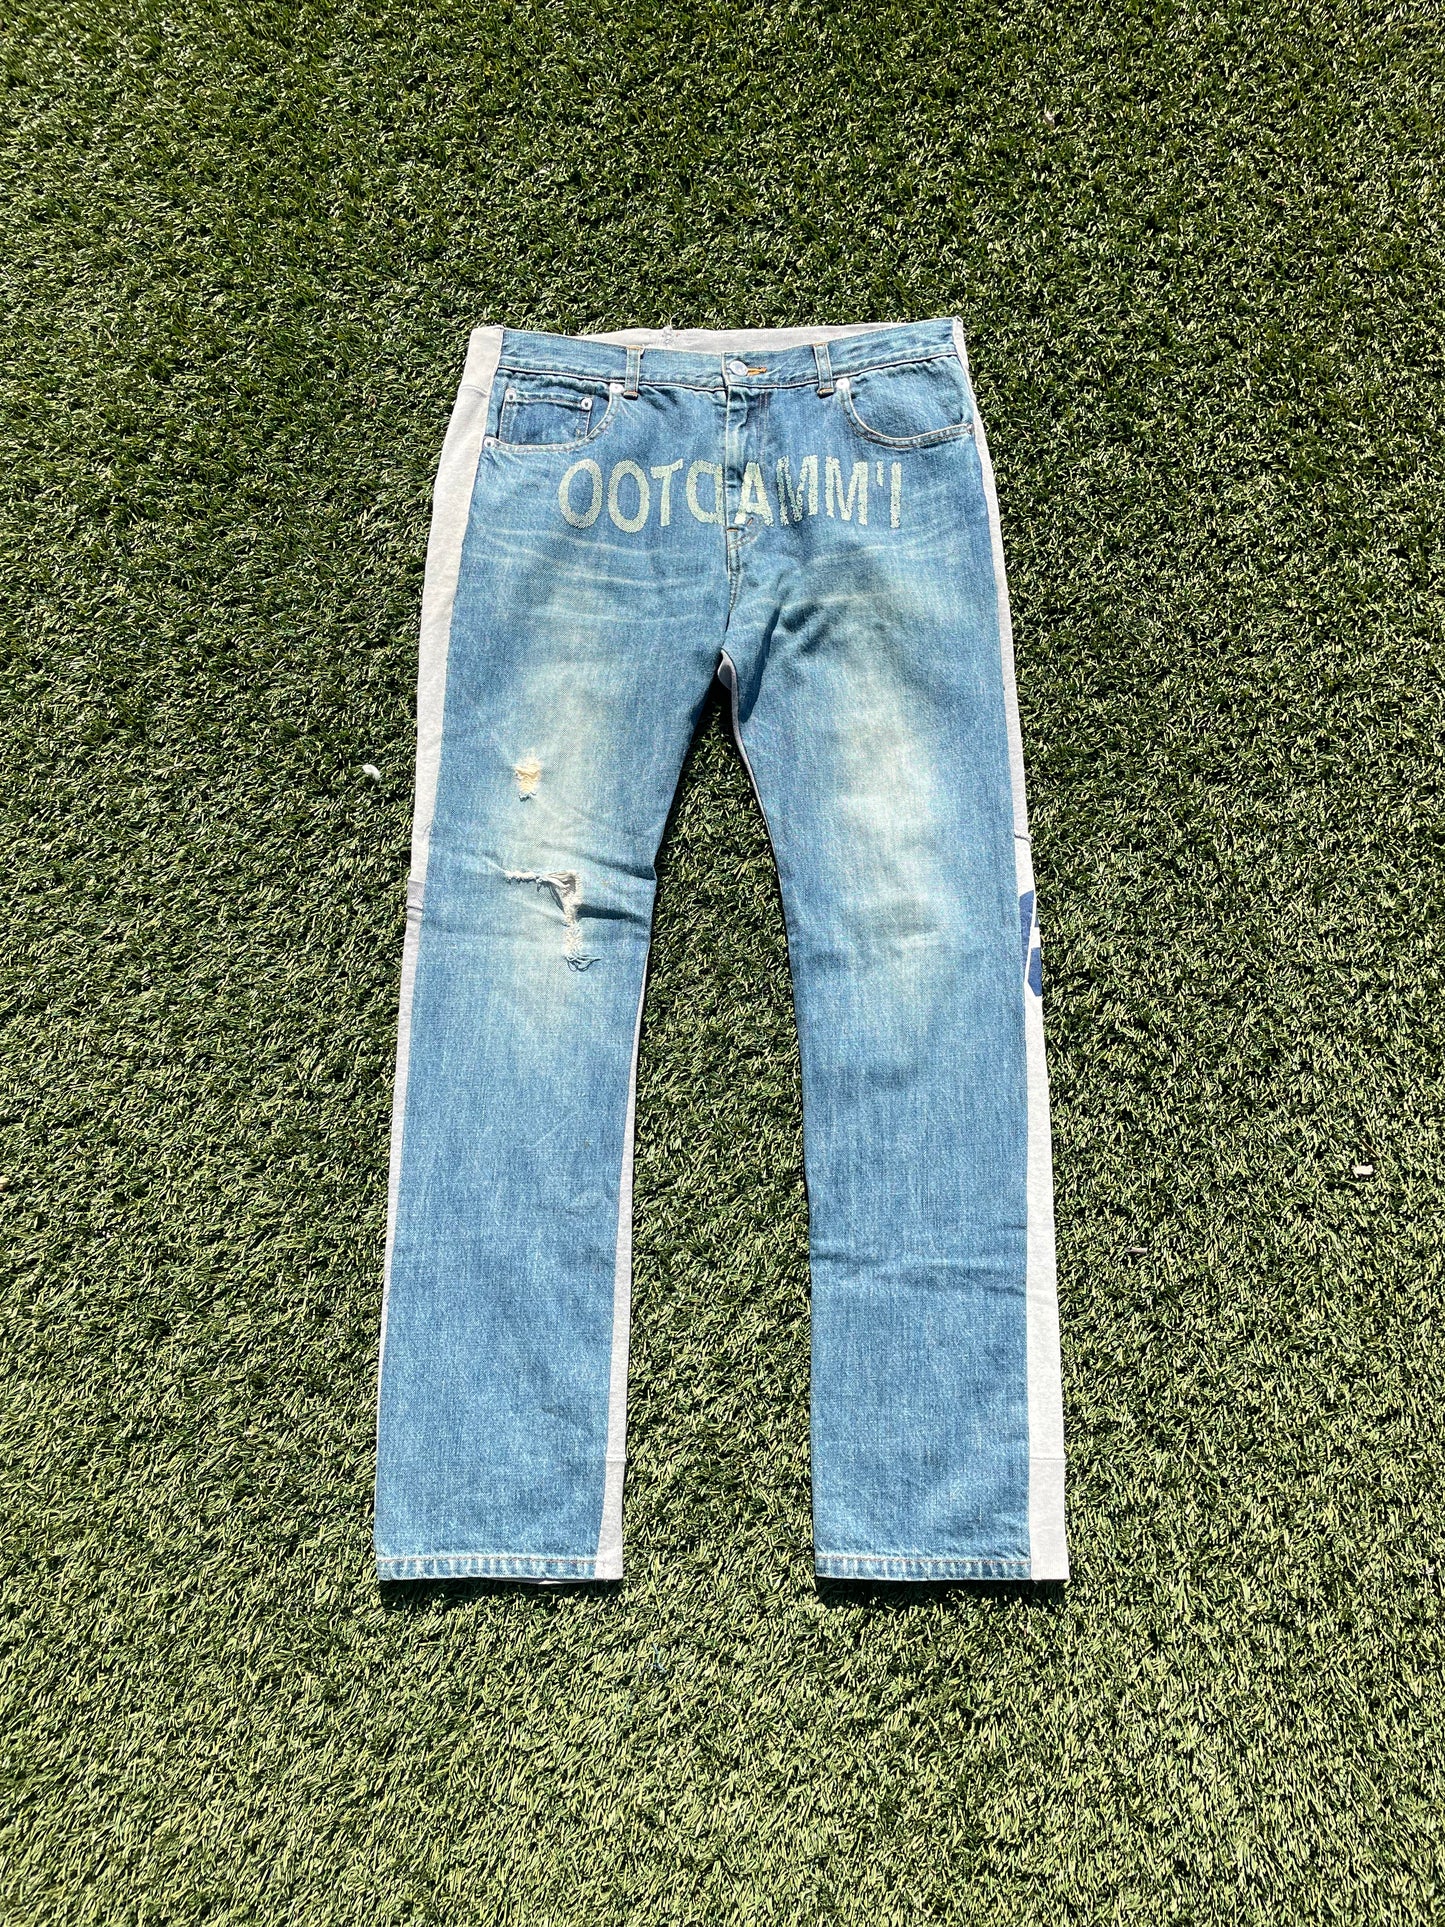 AW2002 “Witch Cell Division” - Undercover ‘Immadtoo’ Hybrid Denim